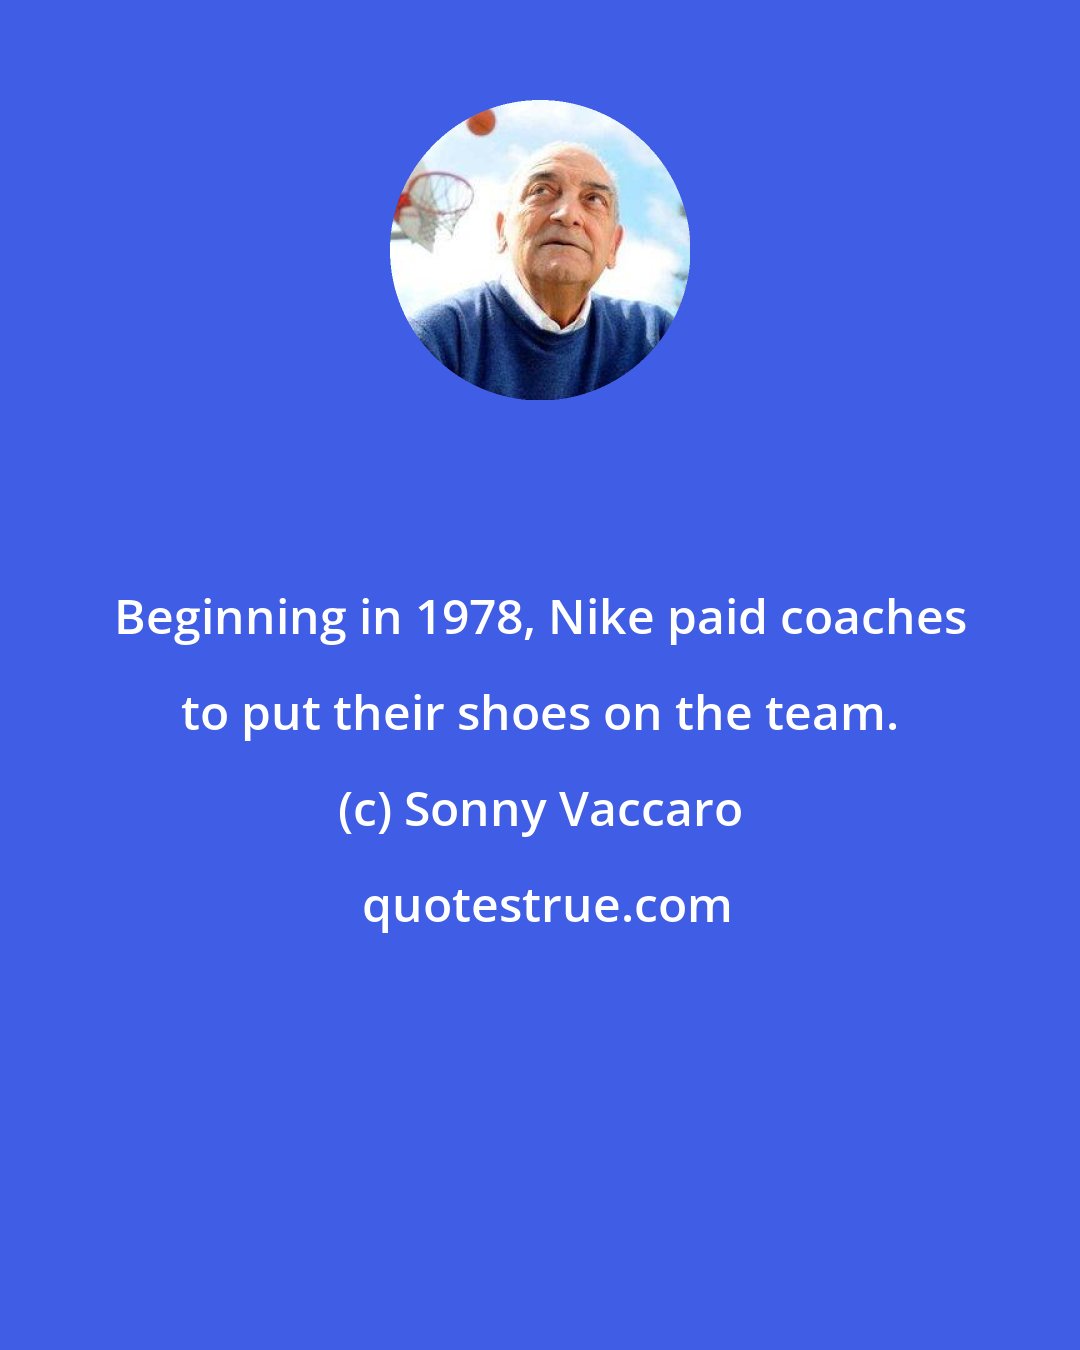 Sonny Vaccaro: Beginning in 1978, Nike paid coaches to put their shoes on the team.